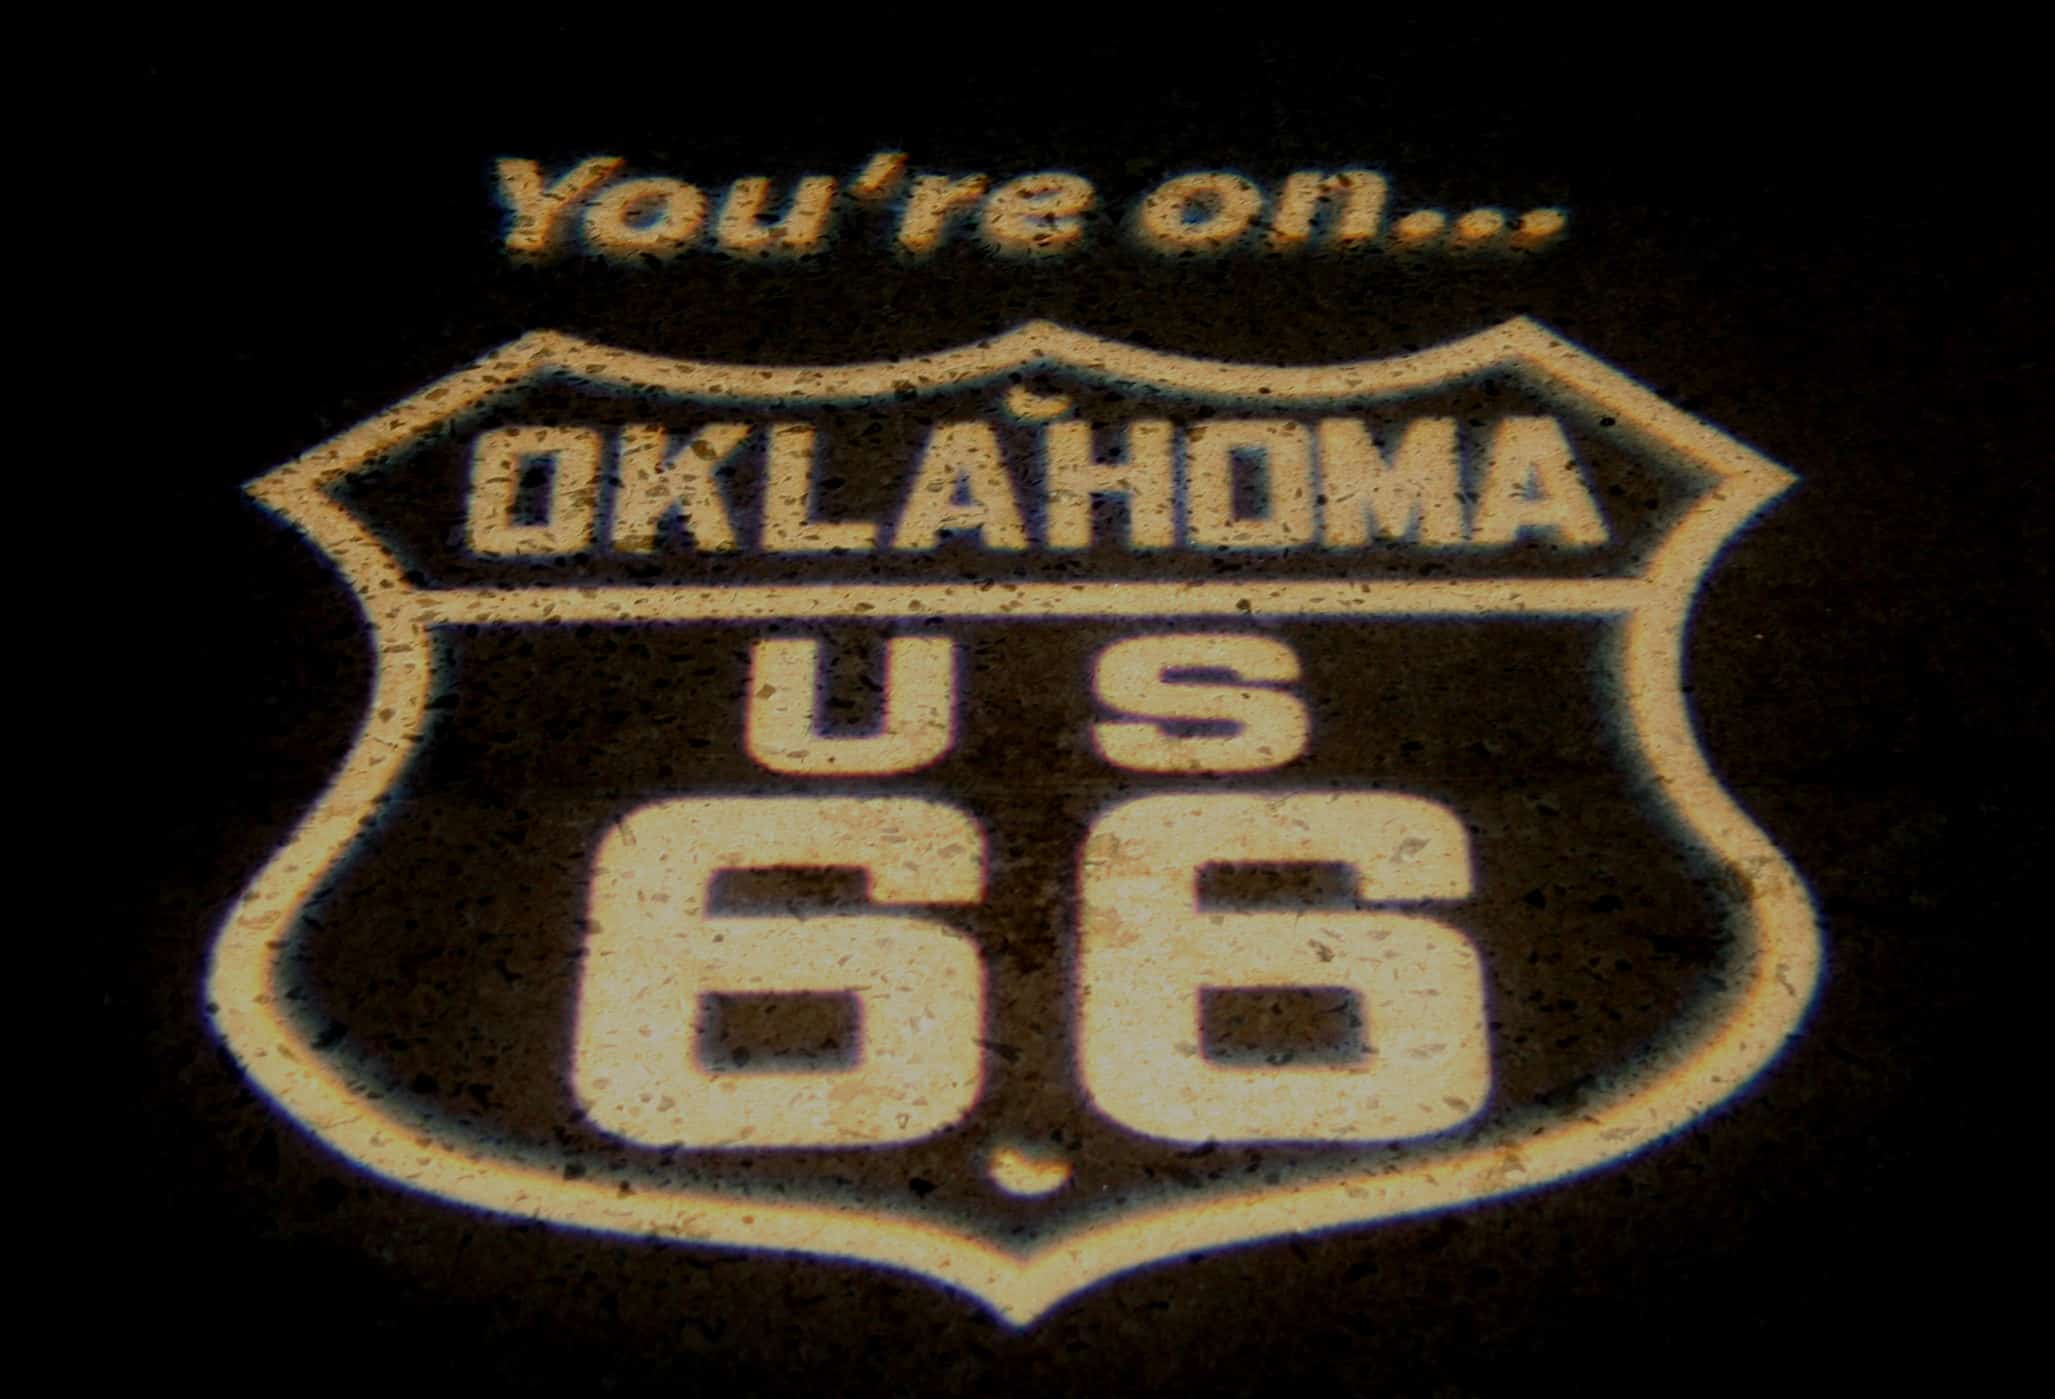 <p>While it is easy to pass by Clinton, Oklahoma, on your Route 66 journey, you should consider taking the detour. It is the home of the Oklahoma Route 66 Museum and several historic locations. There are also plenty of beautiful trails to take if you need to stretch your legs.</p><p>Sharks, lions, alligators, and more! Don’t miss today’s latest and most exciting animal news. <strong><a href="https://www.msn.com/en-us/channel/source/AZ%20Animals%20US/sr-vid-7etr9q8xun6k6508c3nufaum0de3dqktiq6h27ddeagnfug30wka">Click here to access the A-Z Animals profile page</a> and be sure to hit the <em>Follow</em> button here or at the top of this article!</strong></p> <p>Have feedback? Add a comment below!</p>